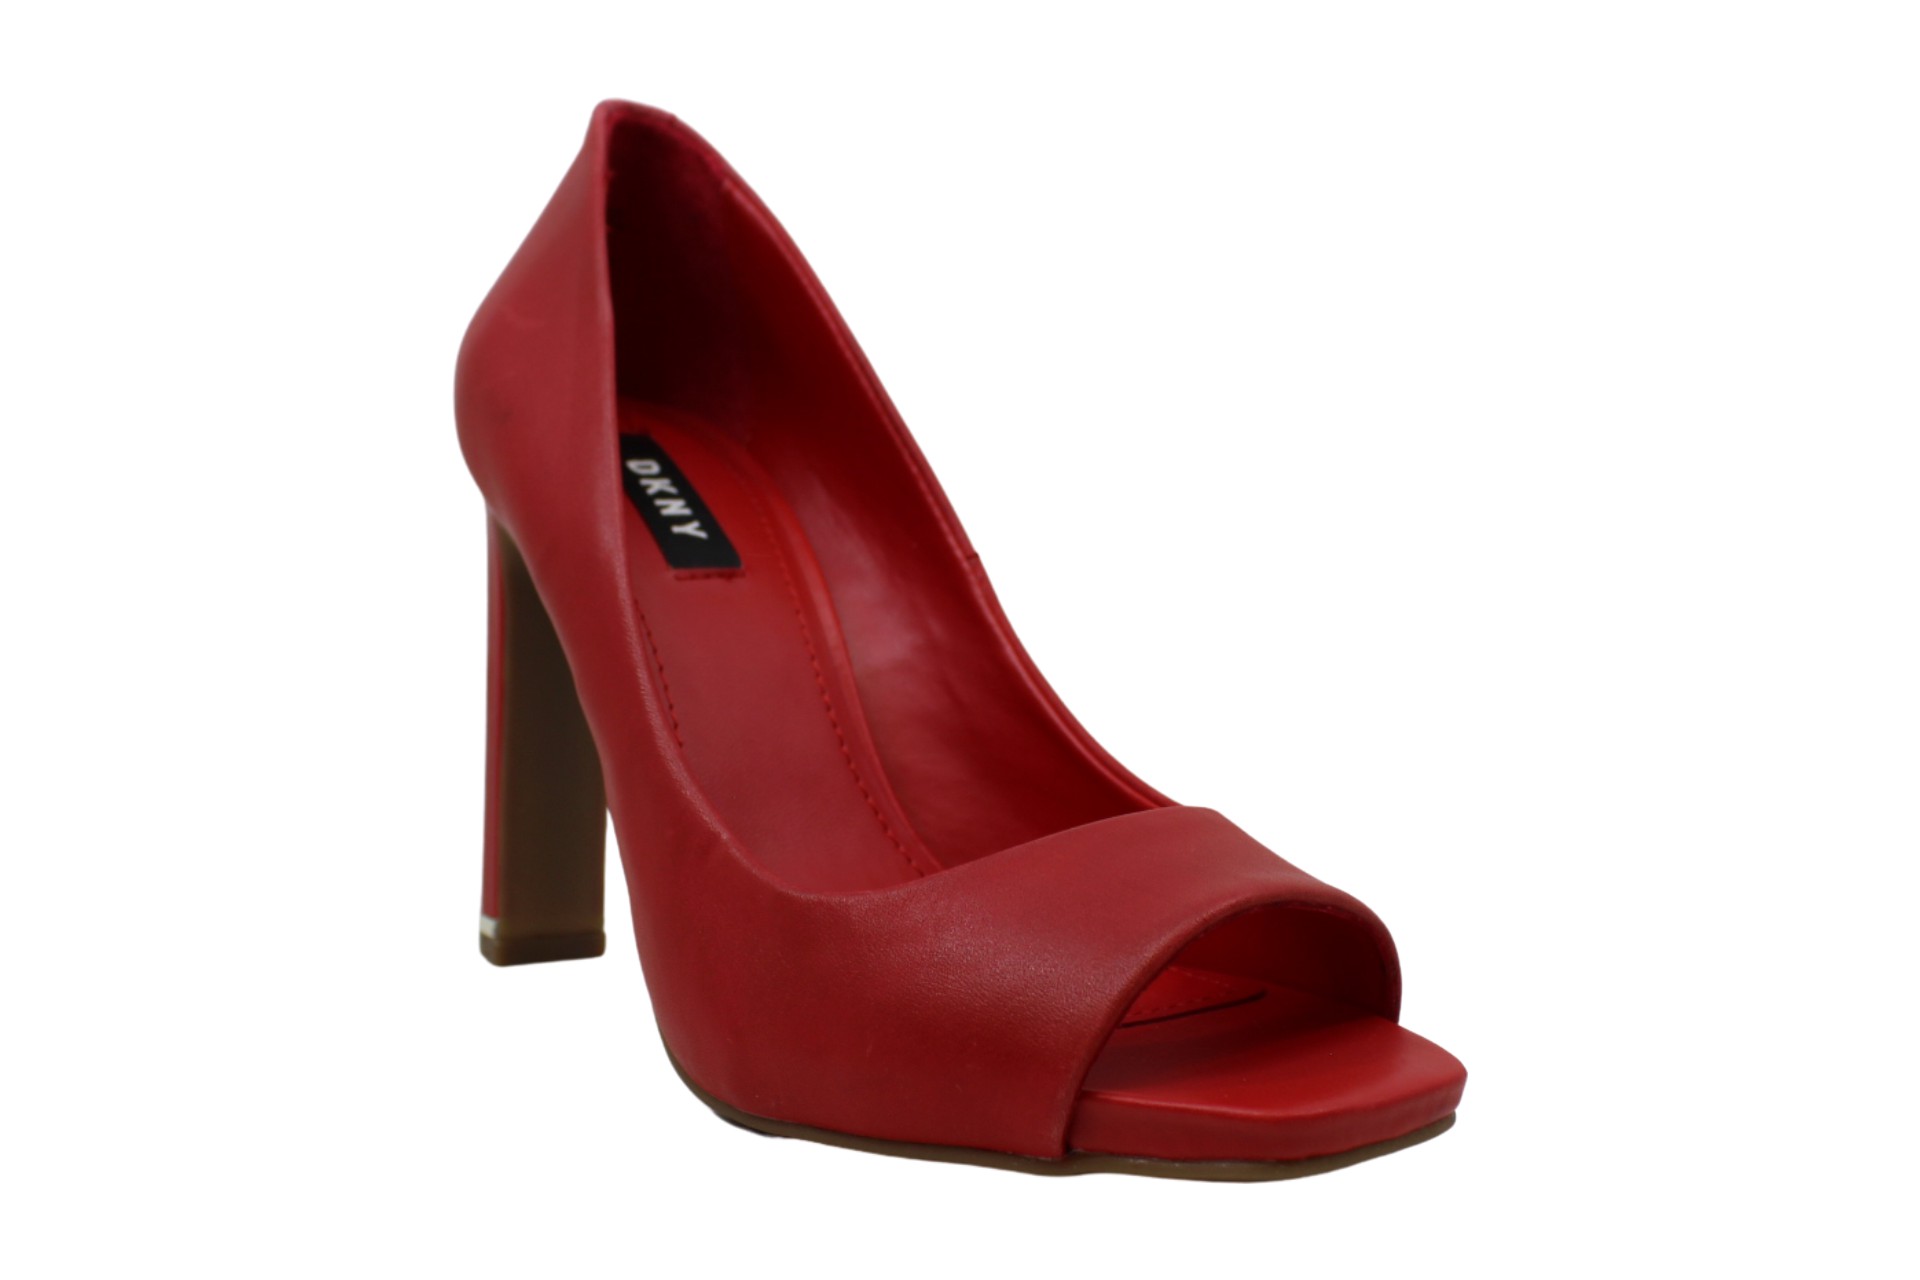 DKNY Womens Claudia Leather Peep Toe Classic Pumps, Red, Size 7.5 | eBay